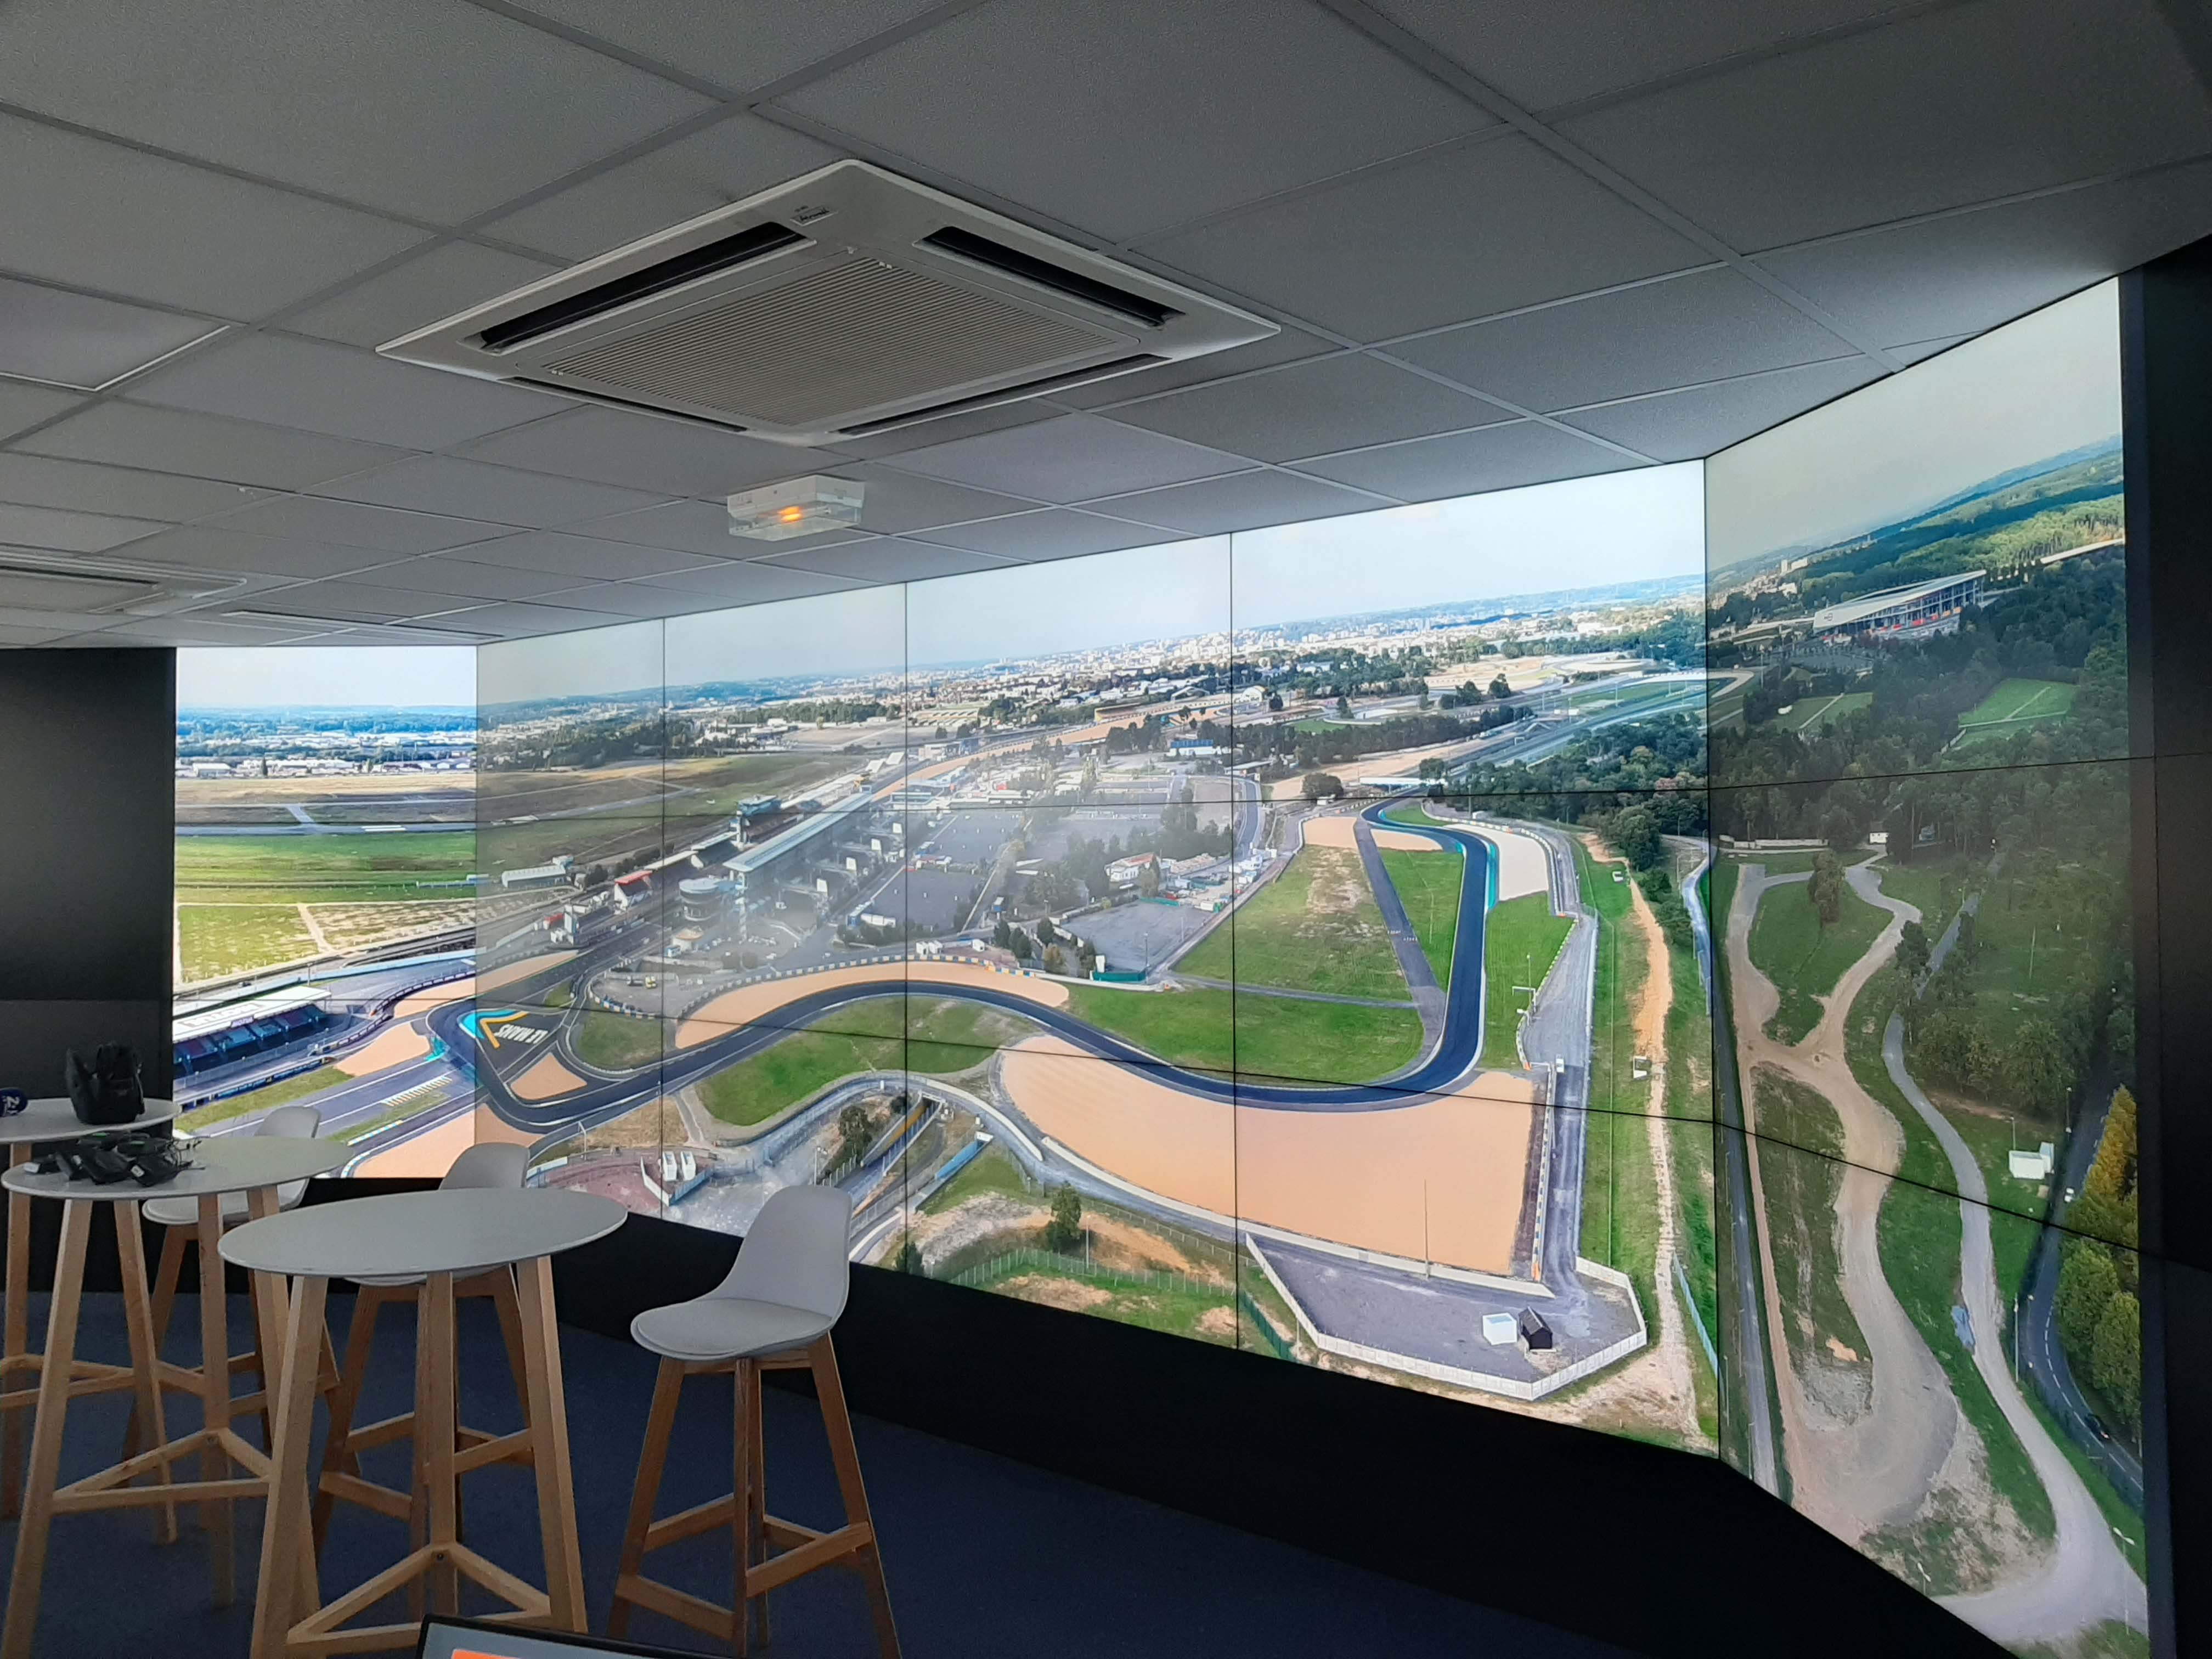 24 x 5 videowall in Le Mans Control Room, France